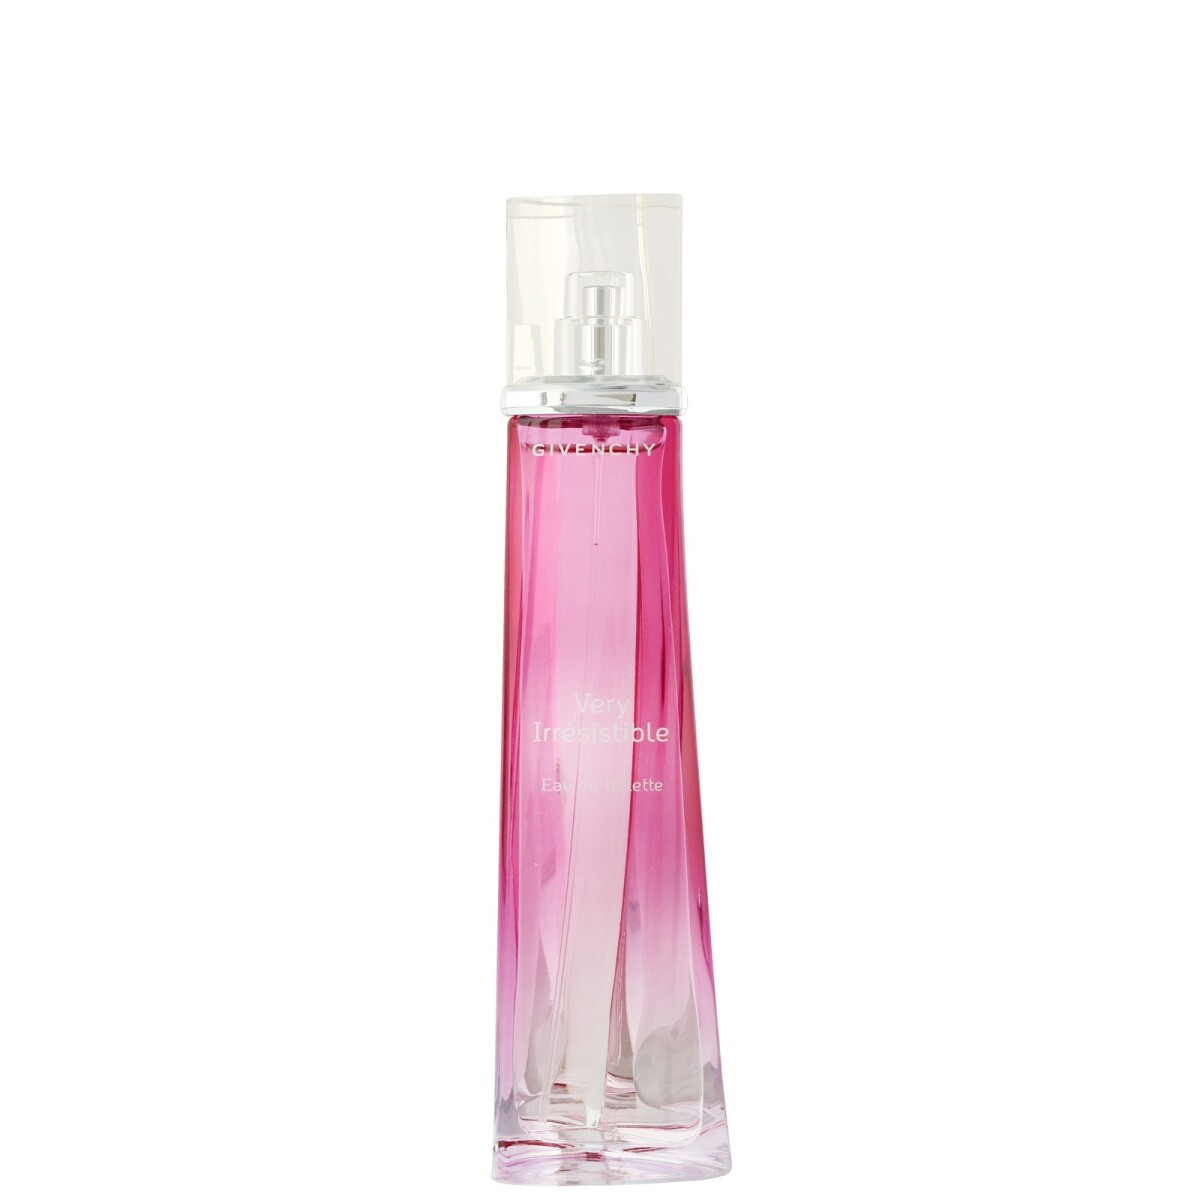 Perfume Givenchy Very Irresistible Edt 50ml 